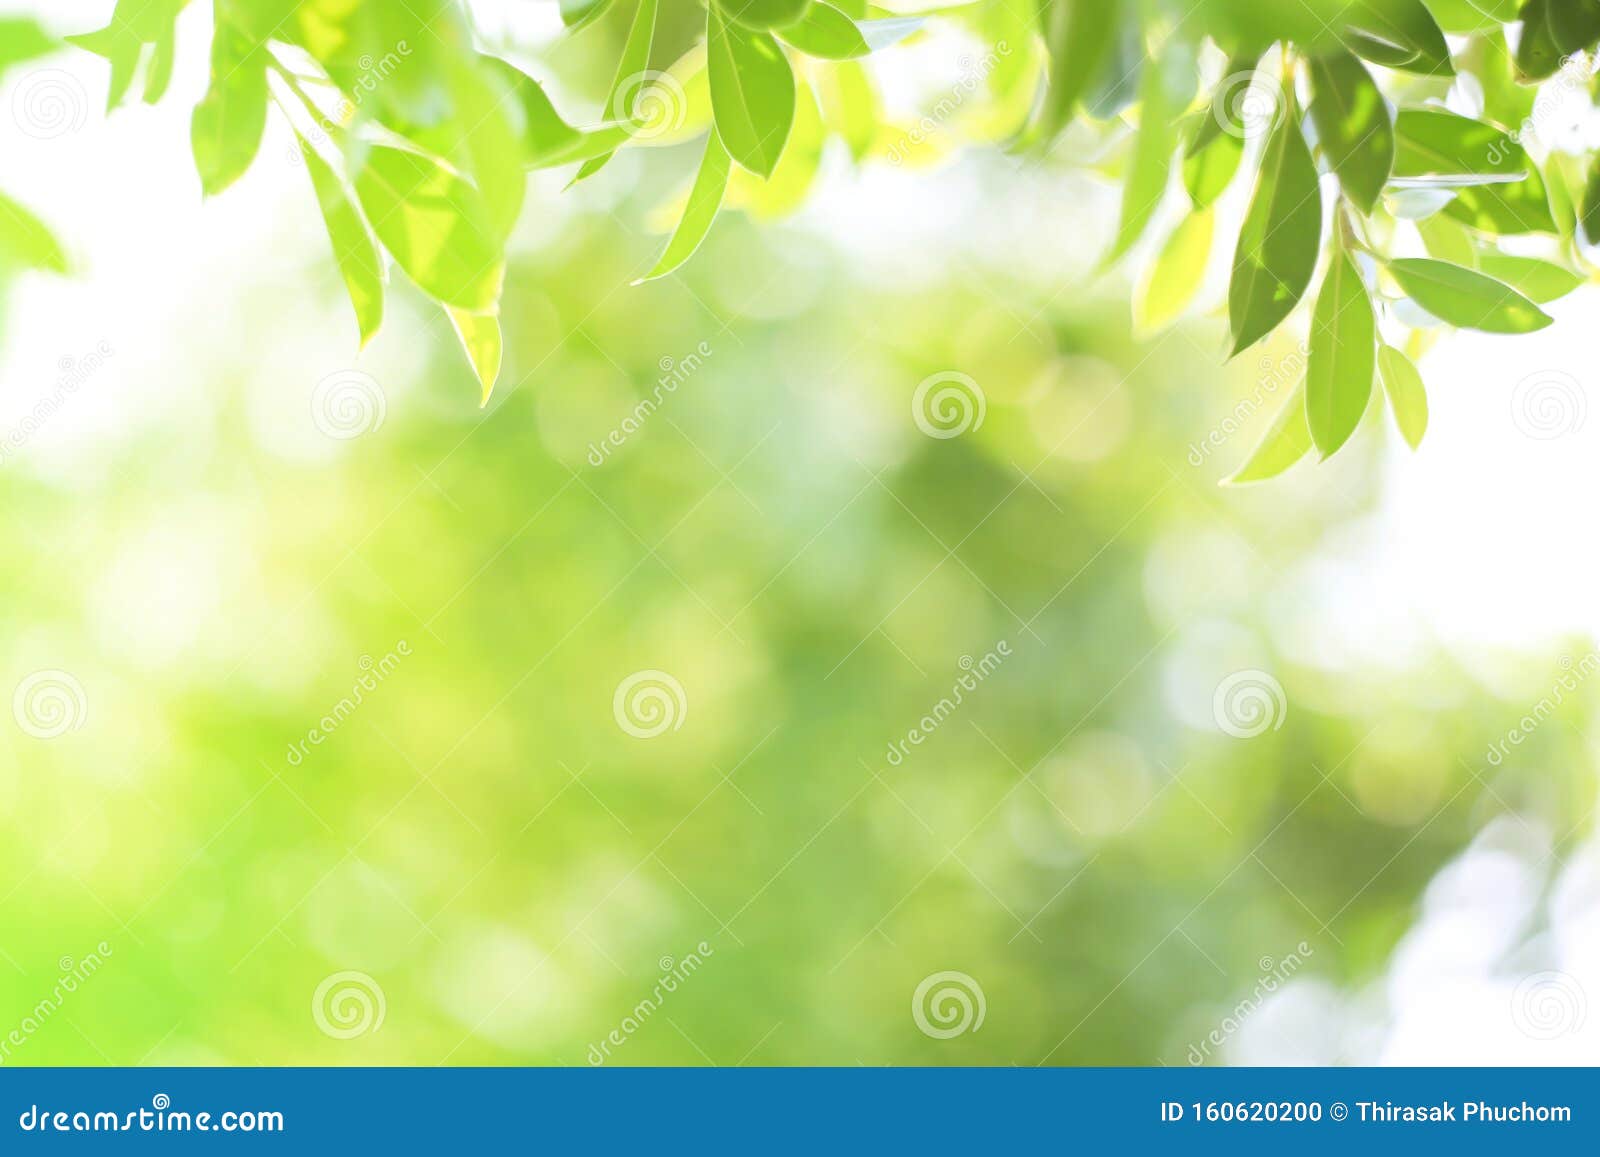 Green Nature Fresh Spring Background Leaf Green in the   Organic Leaves Green and Clean Ecology in Summer Sunlight Pl Stock Photo -  Image of fresh, effect: 160620200